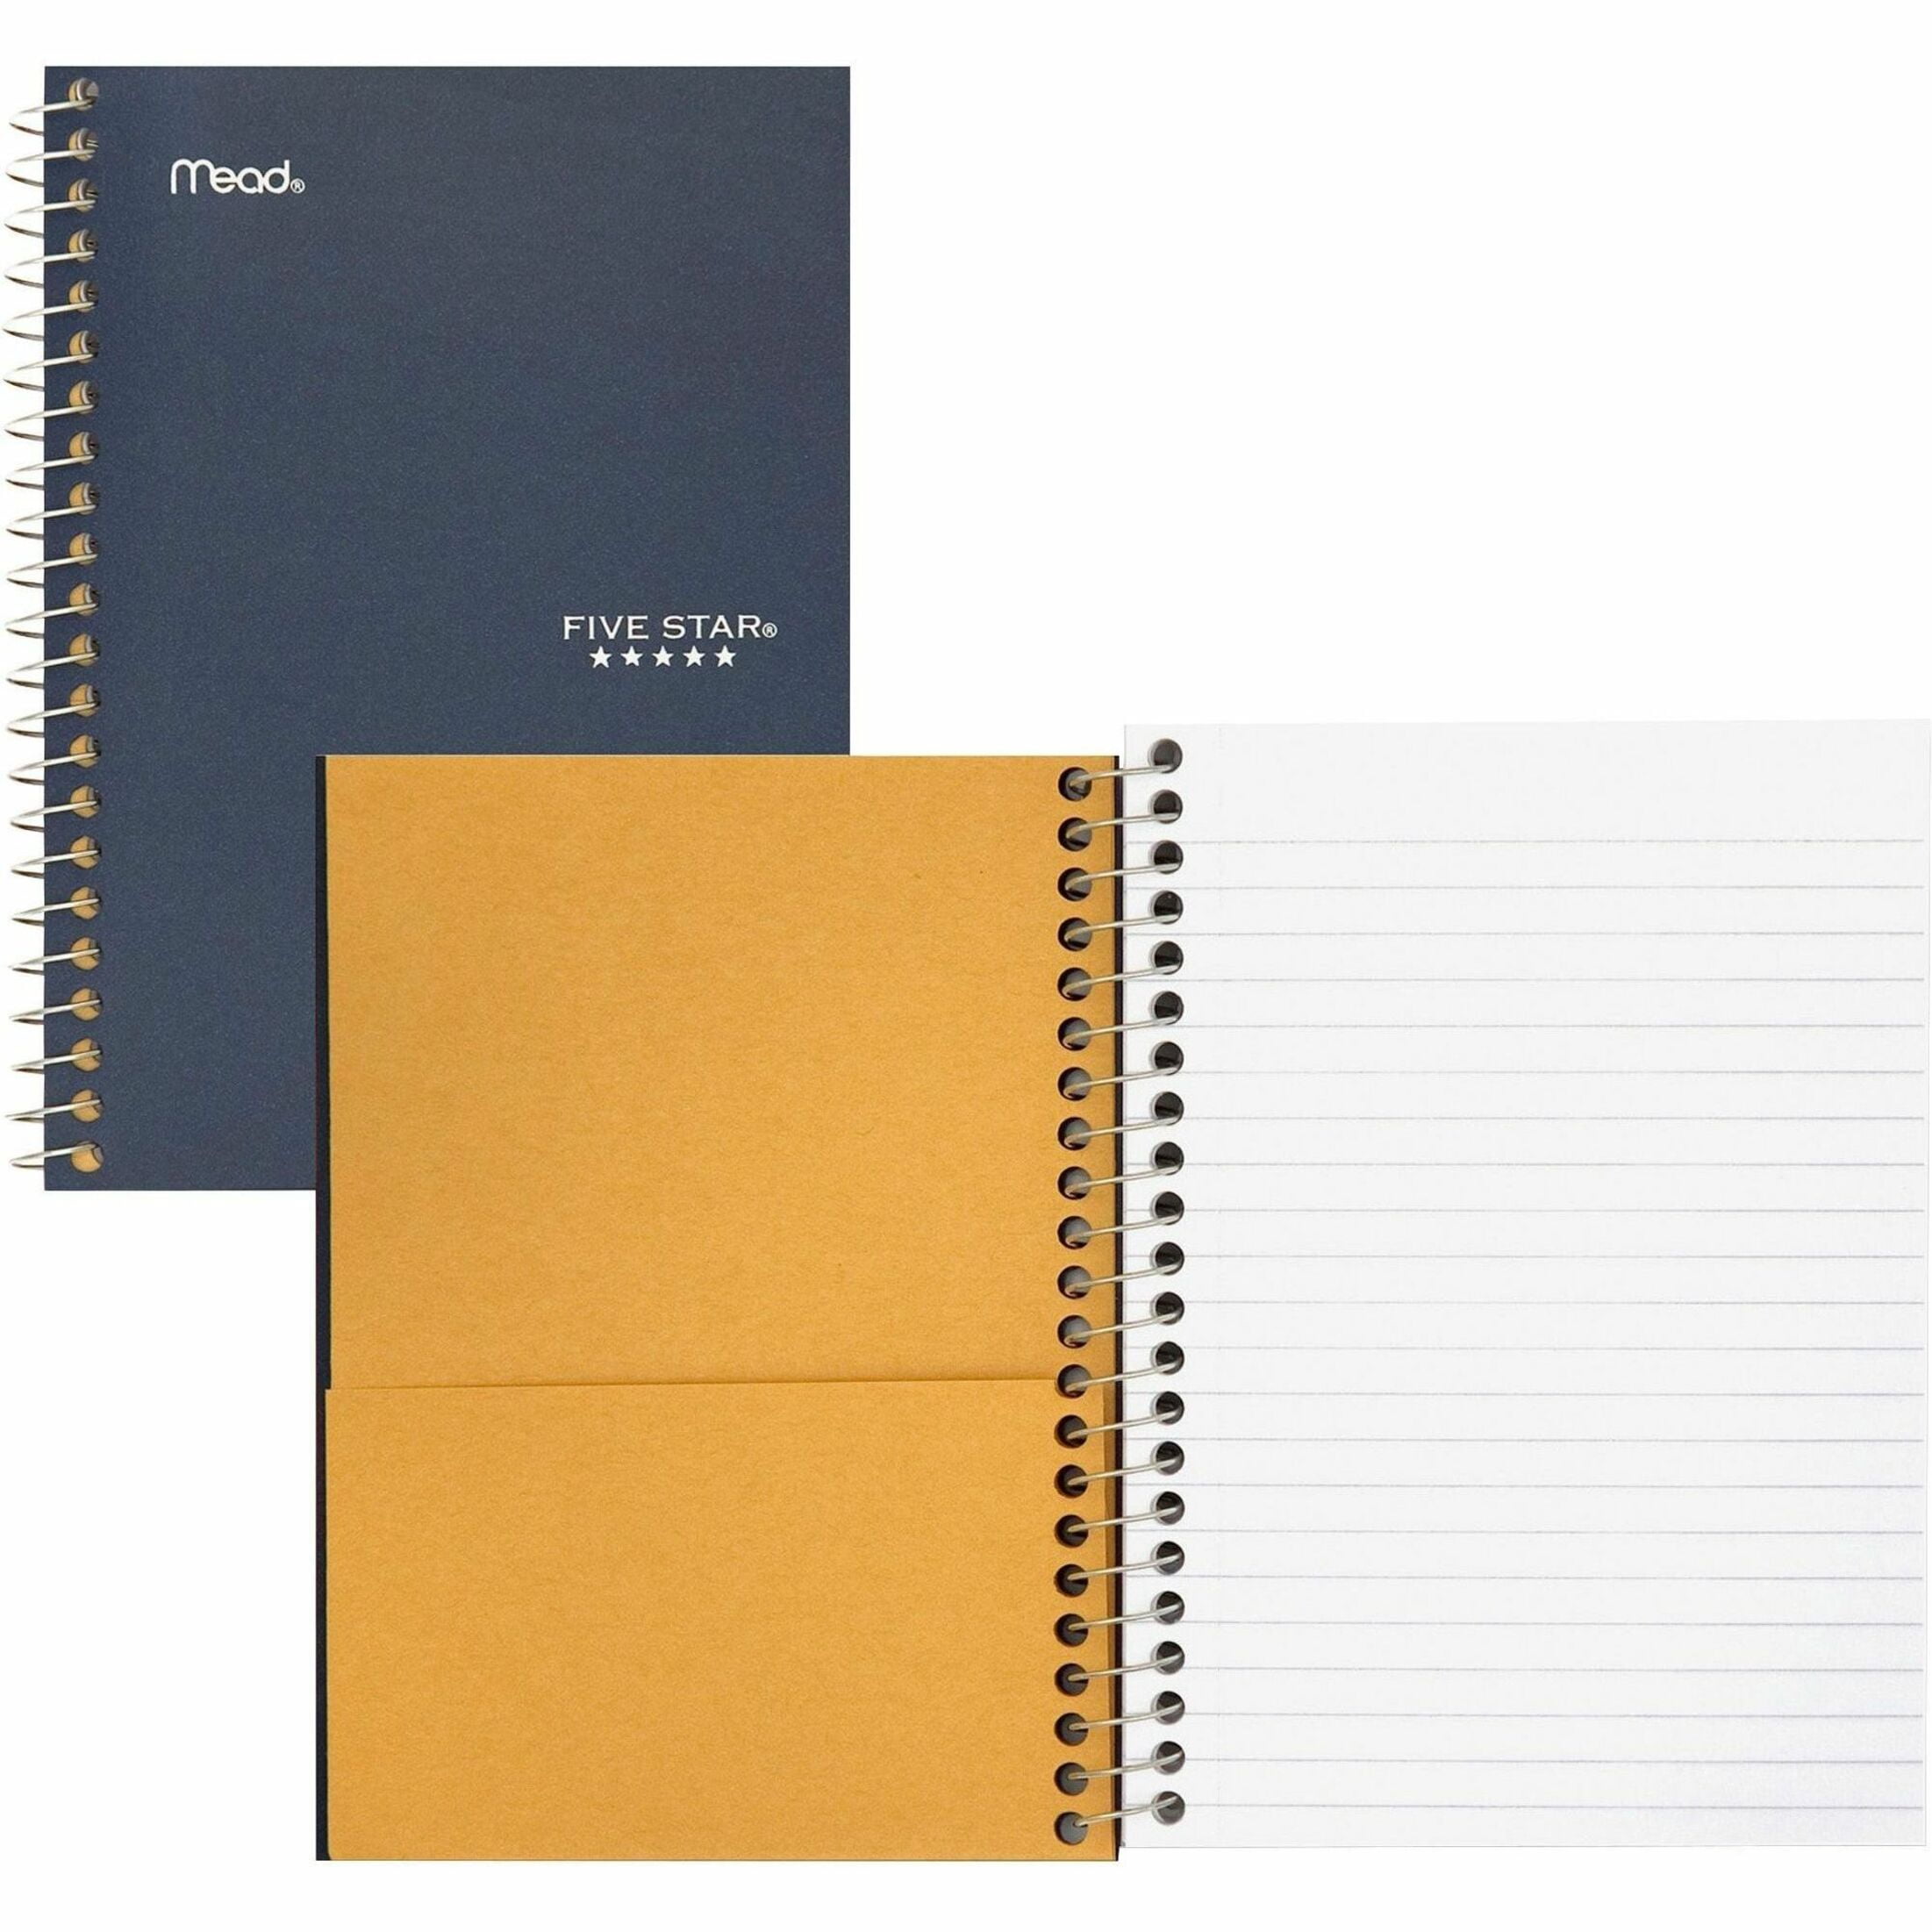 Five Star Personal Spiral Notebook, 100 Sheets, College Ruled, 7" x 5 1/2", Assorted (45484) - image 1 of 3